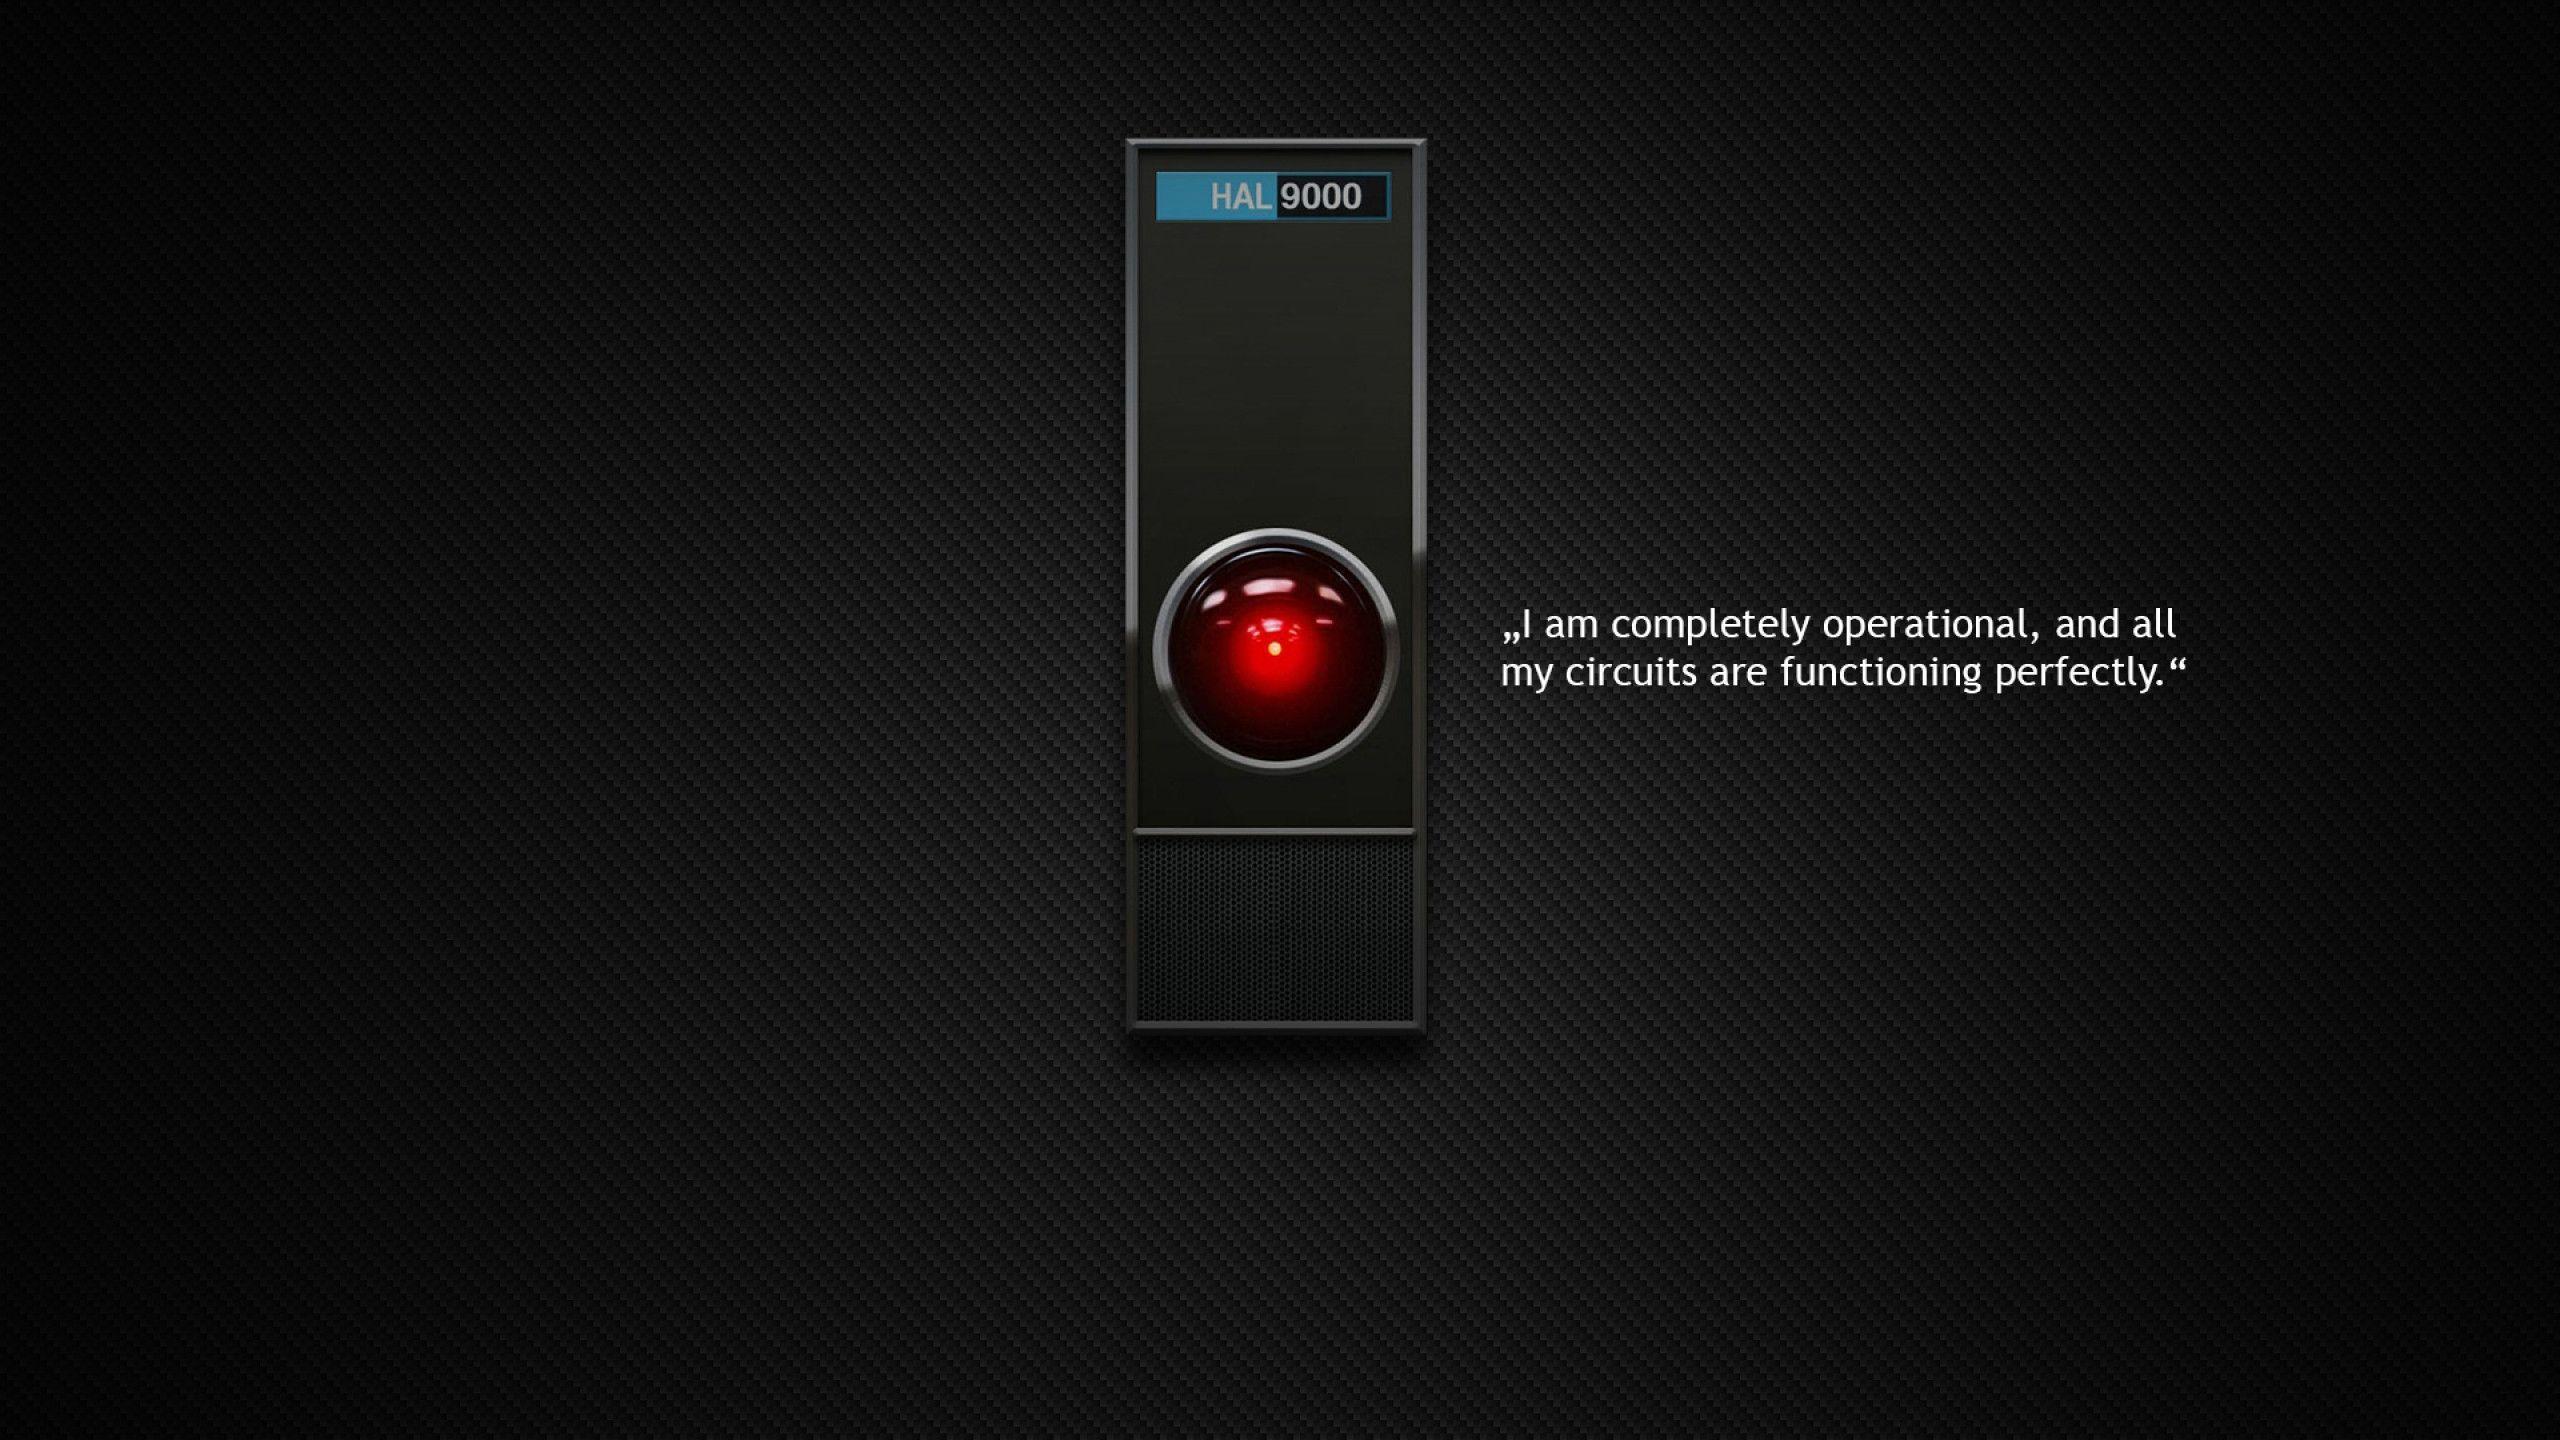 Download 2001: A Space Odyssey Hal 9000 wallpaper, Download